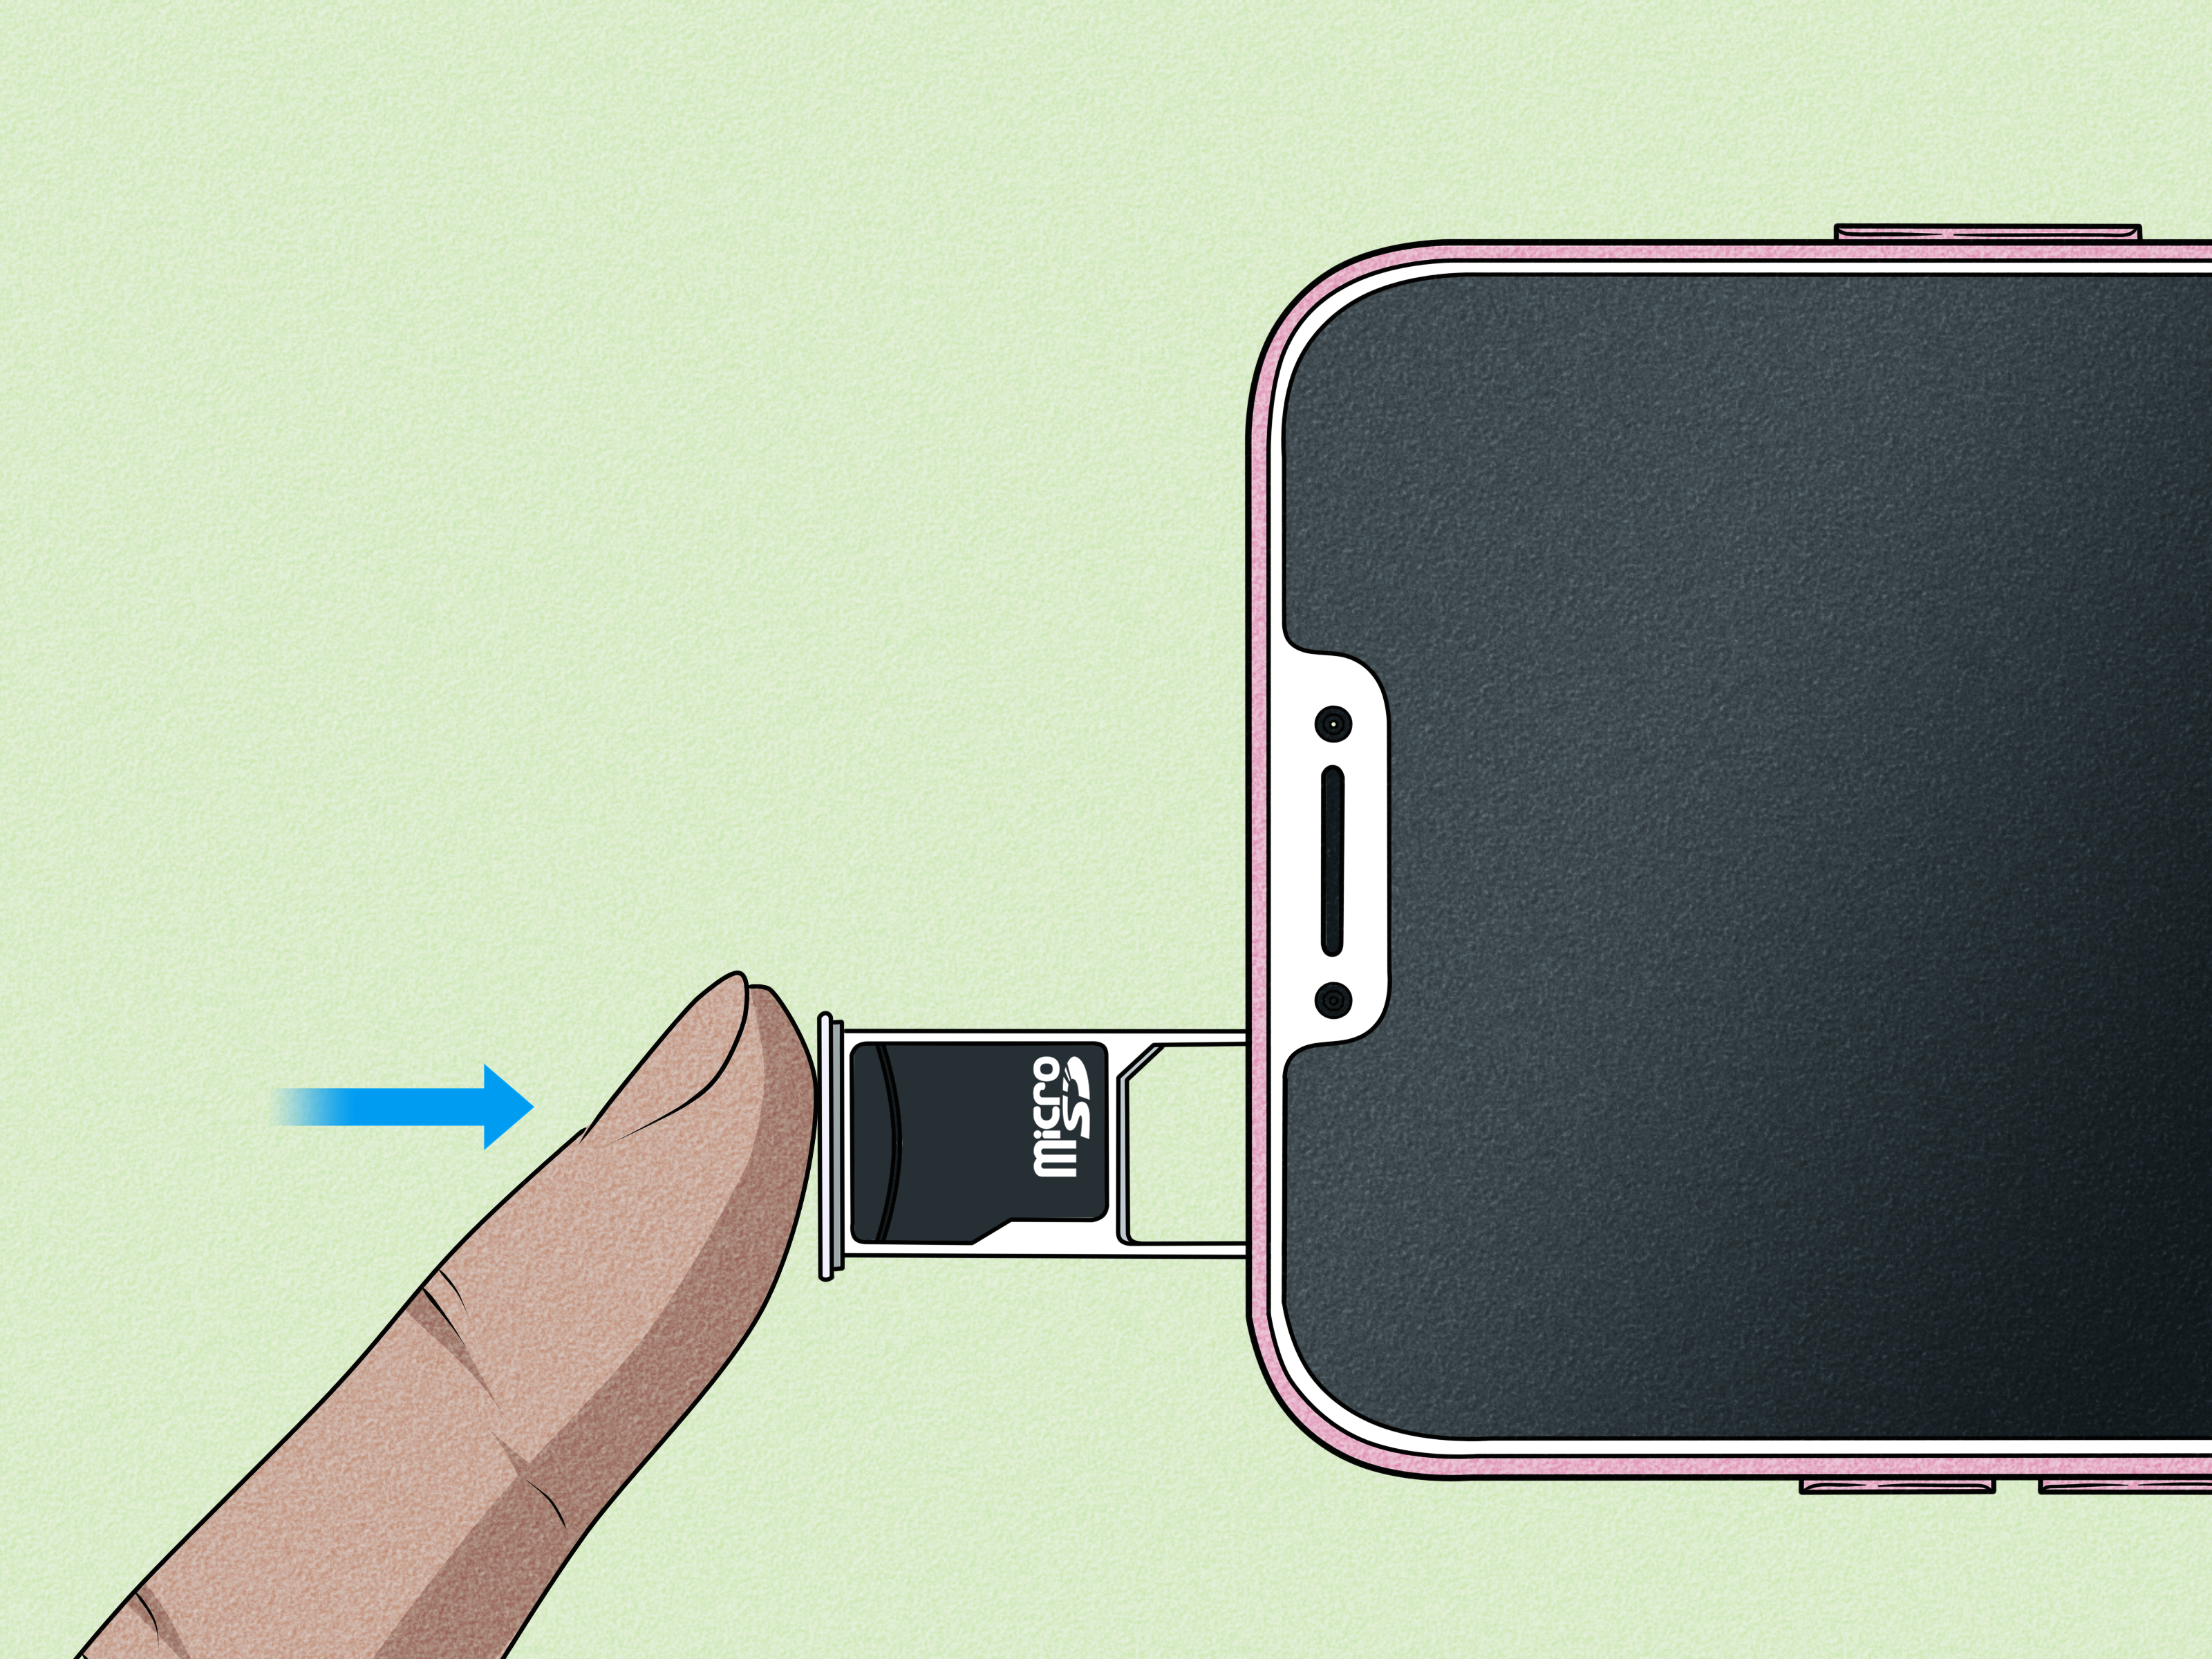 Check SD Card Slot:
Remove and reinsert the SD card